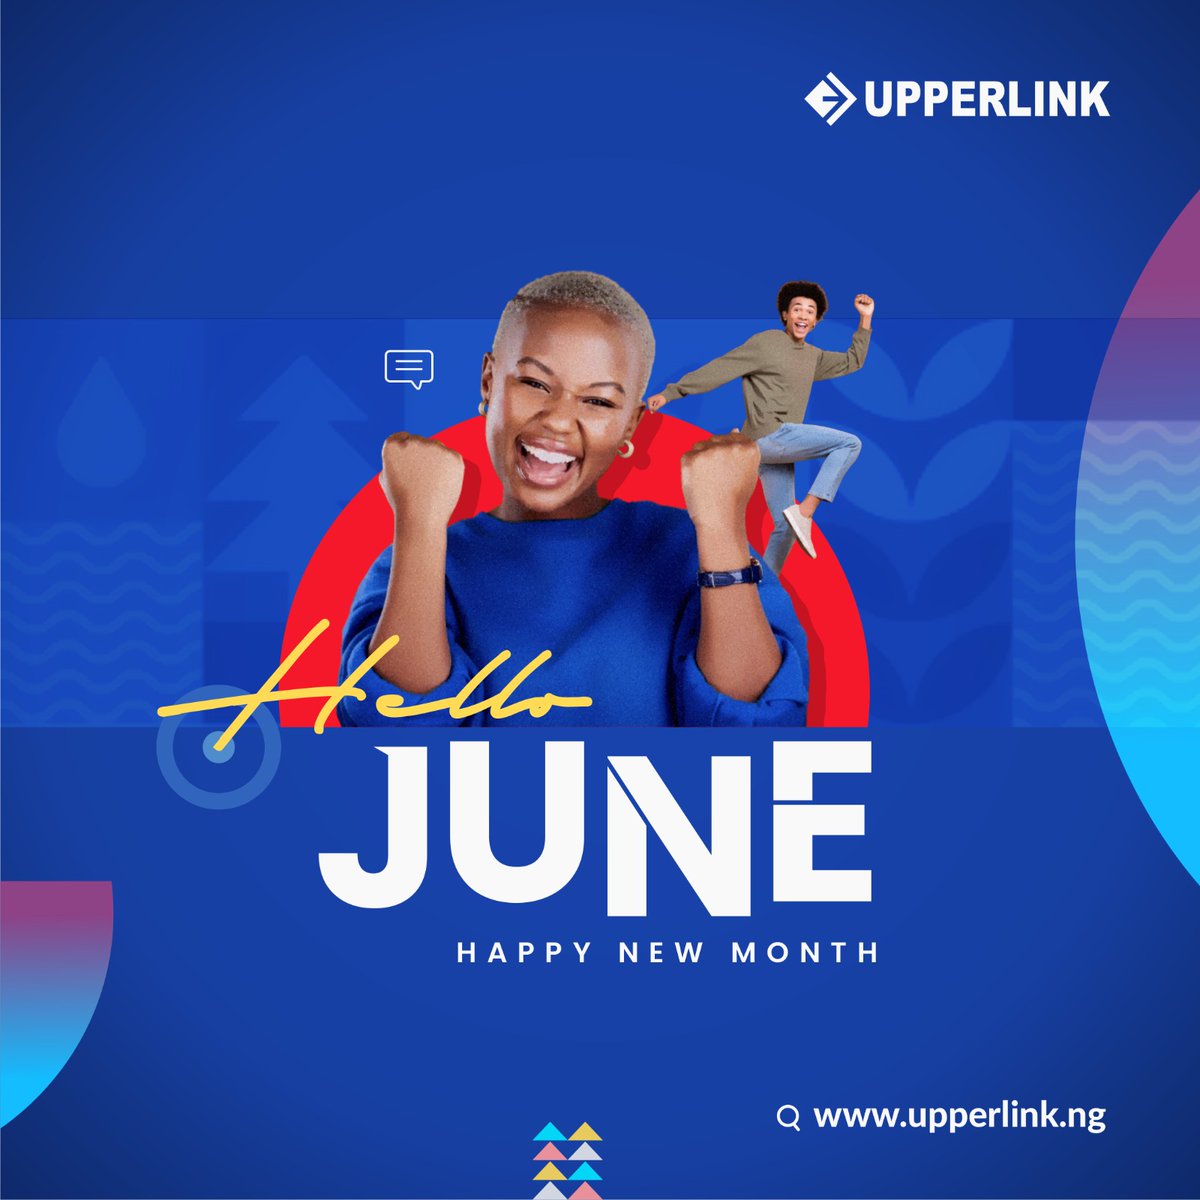 Make June a month to remember!
Our domain hosting and payment gateway systems are designed to help you achieve online success!
#newmonth #upperlink #TechSolutions #upperlinklimited